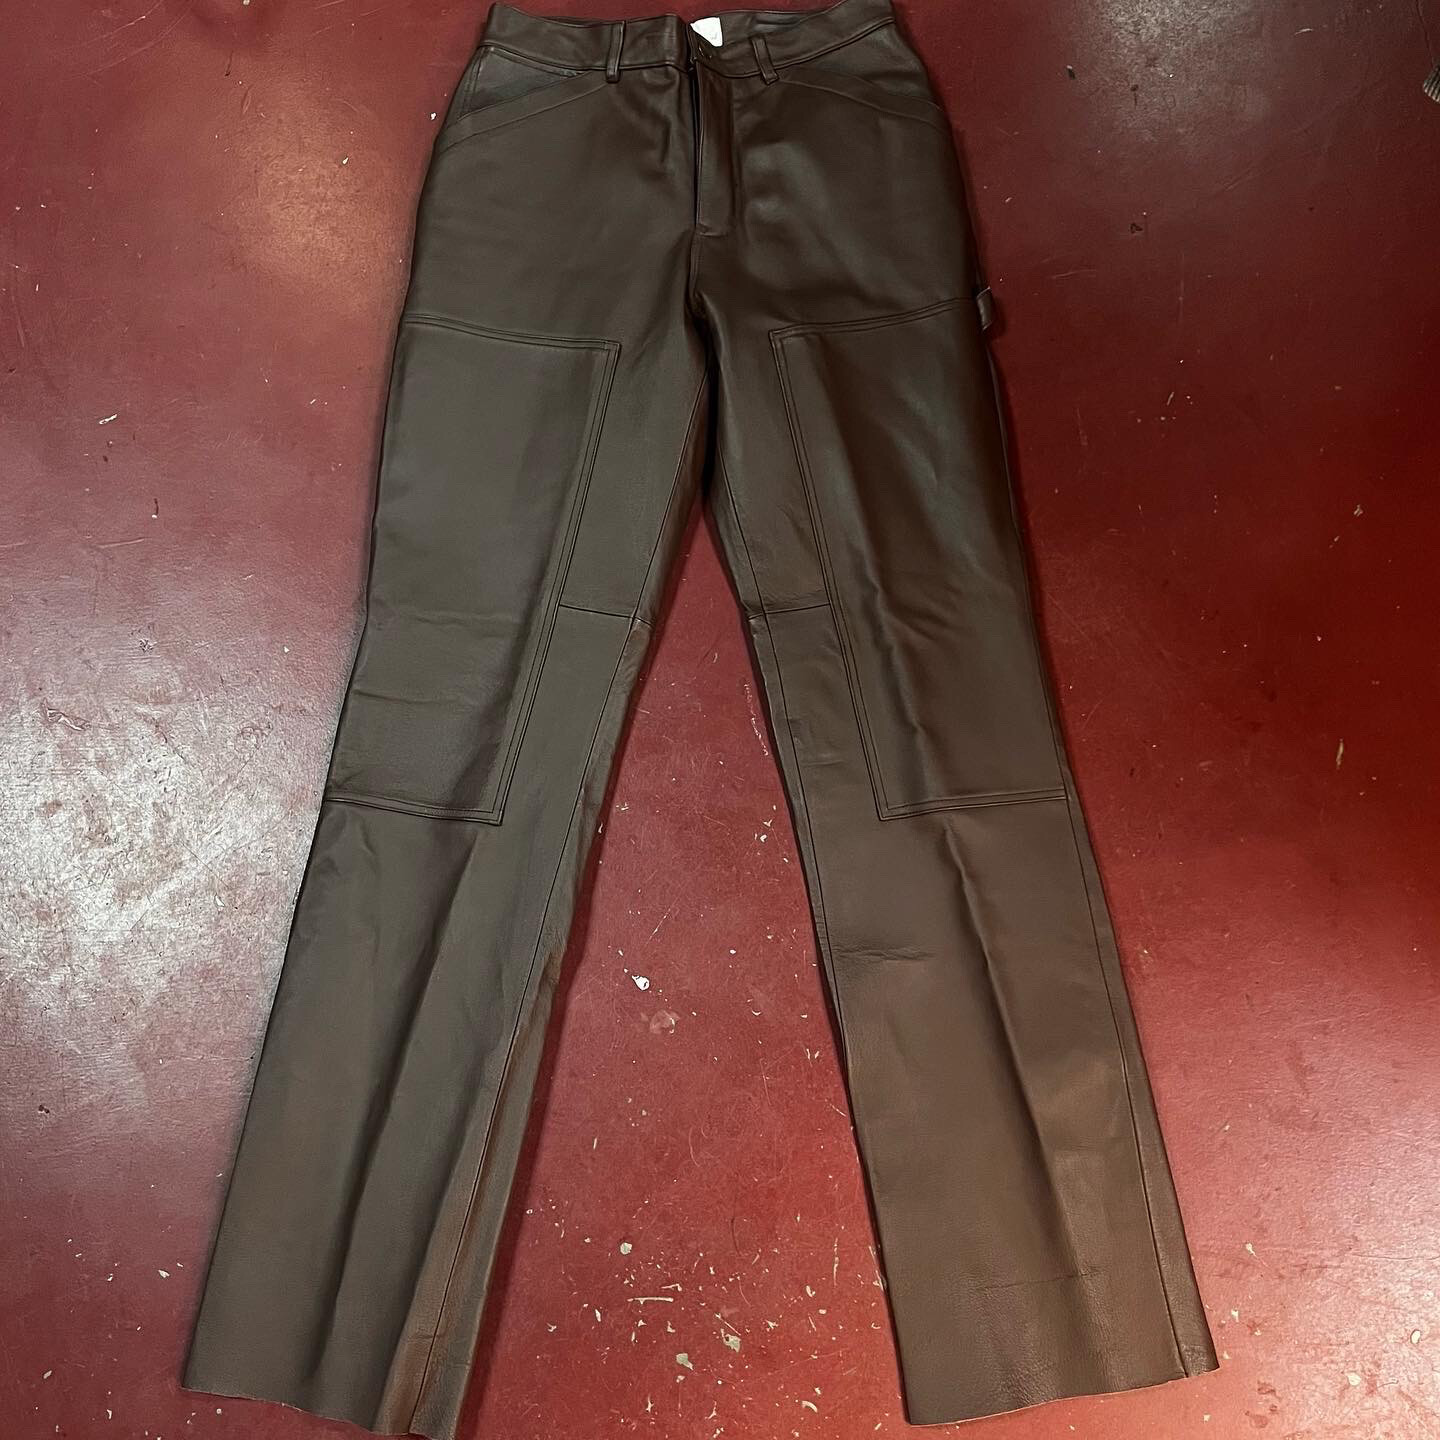 Spiegel Missy Leather Pants. Free Shipping